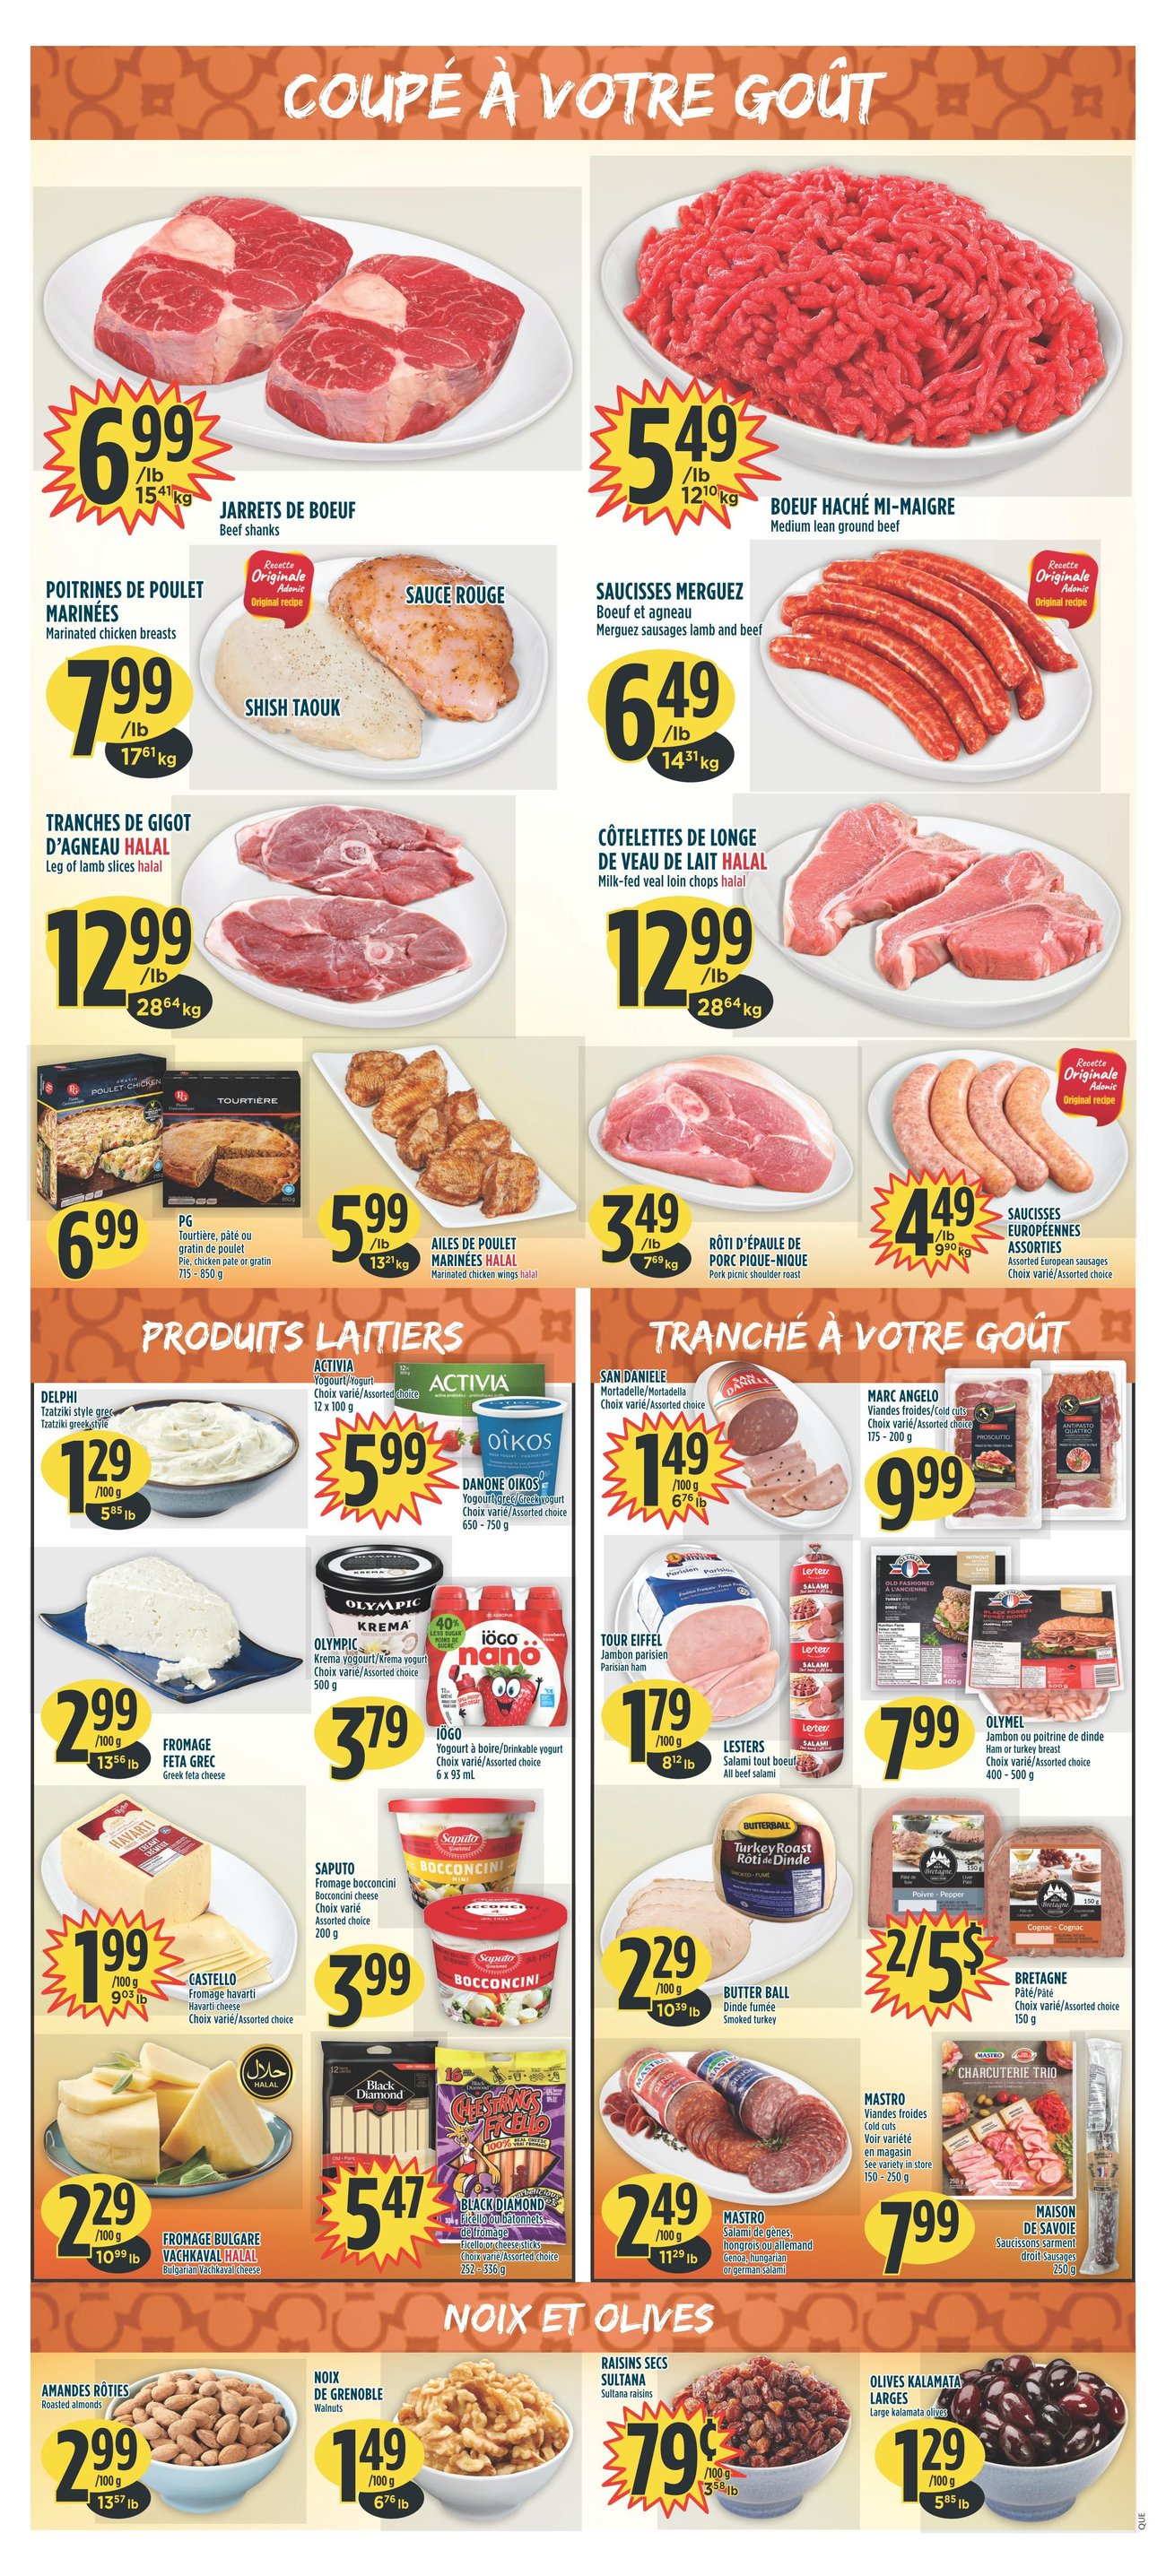 Adonis - Weekly Flyer Specials - Page 3